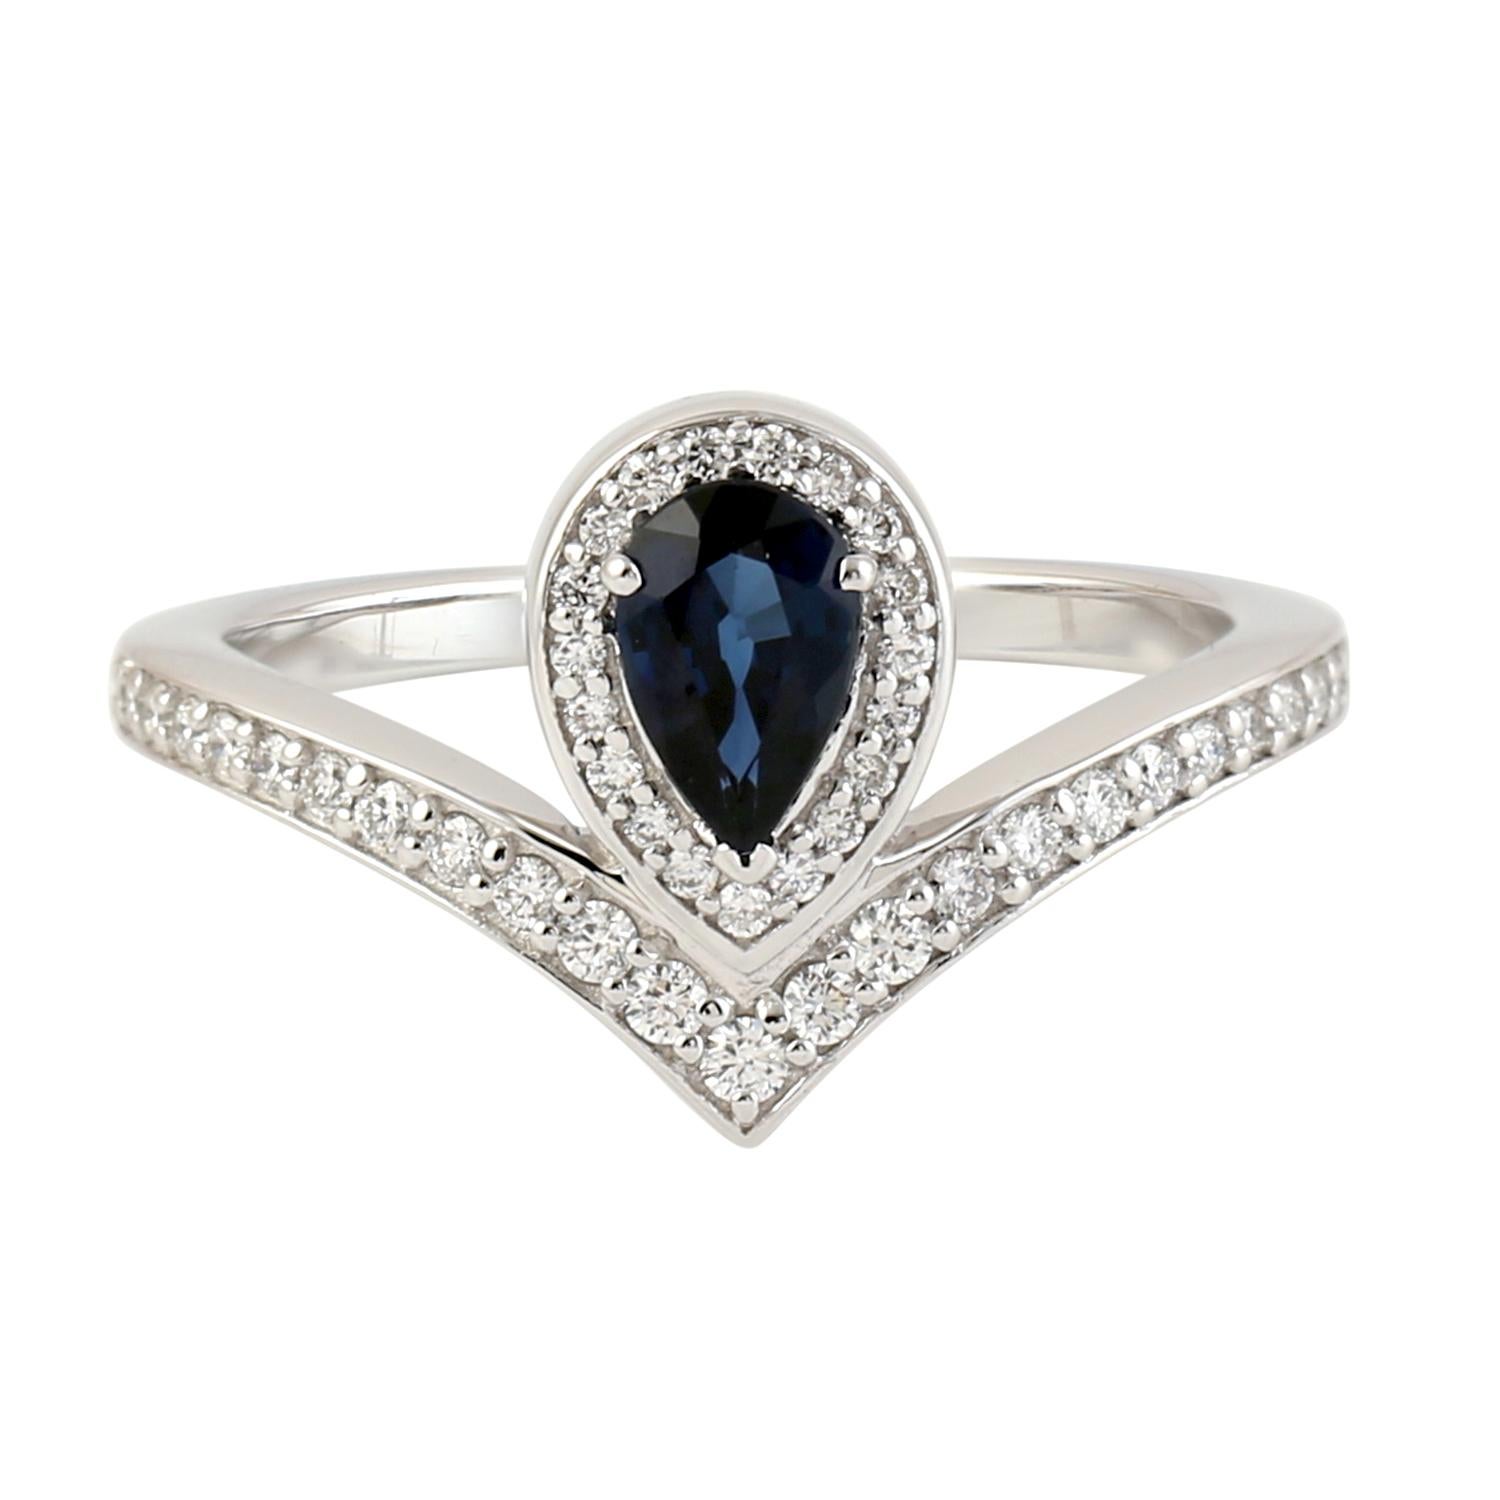 Contemporary Pear Shaped Center Stone Sapphire Ring With Diamonds Made In 18k Gold For Sale